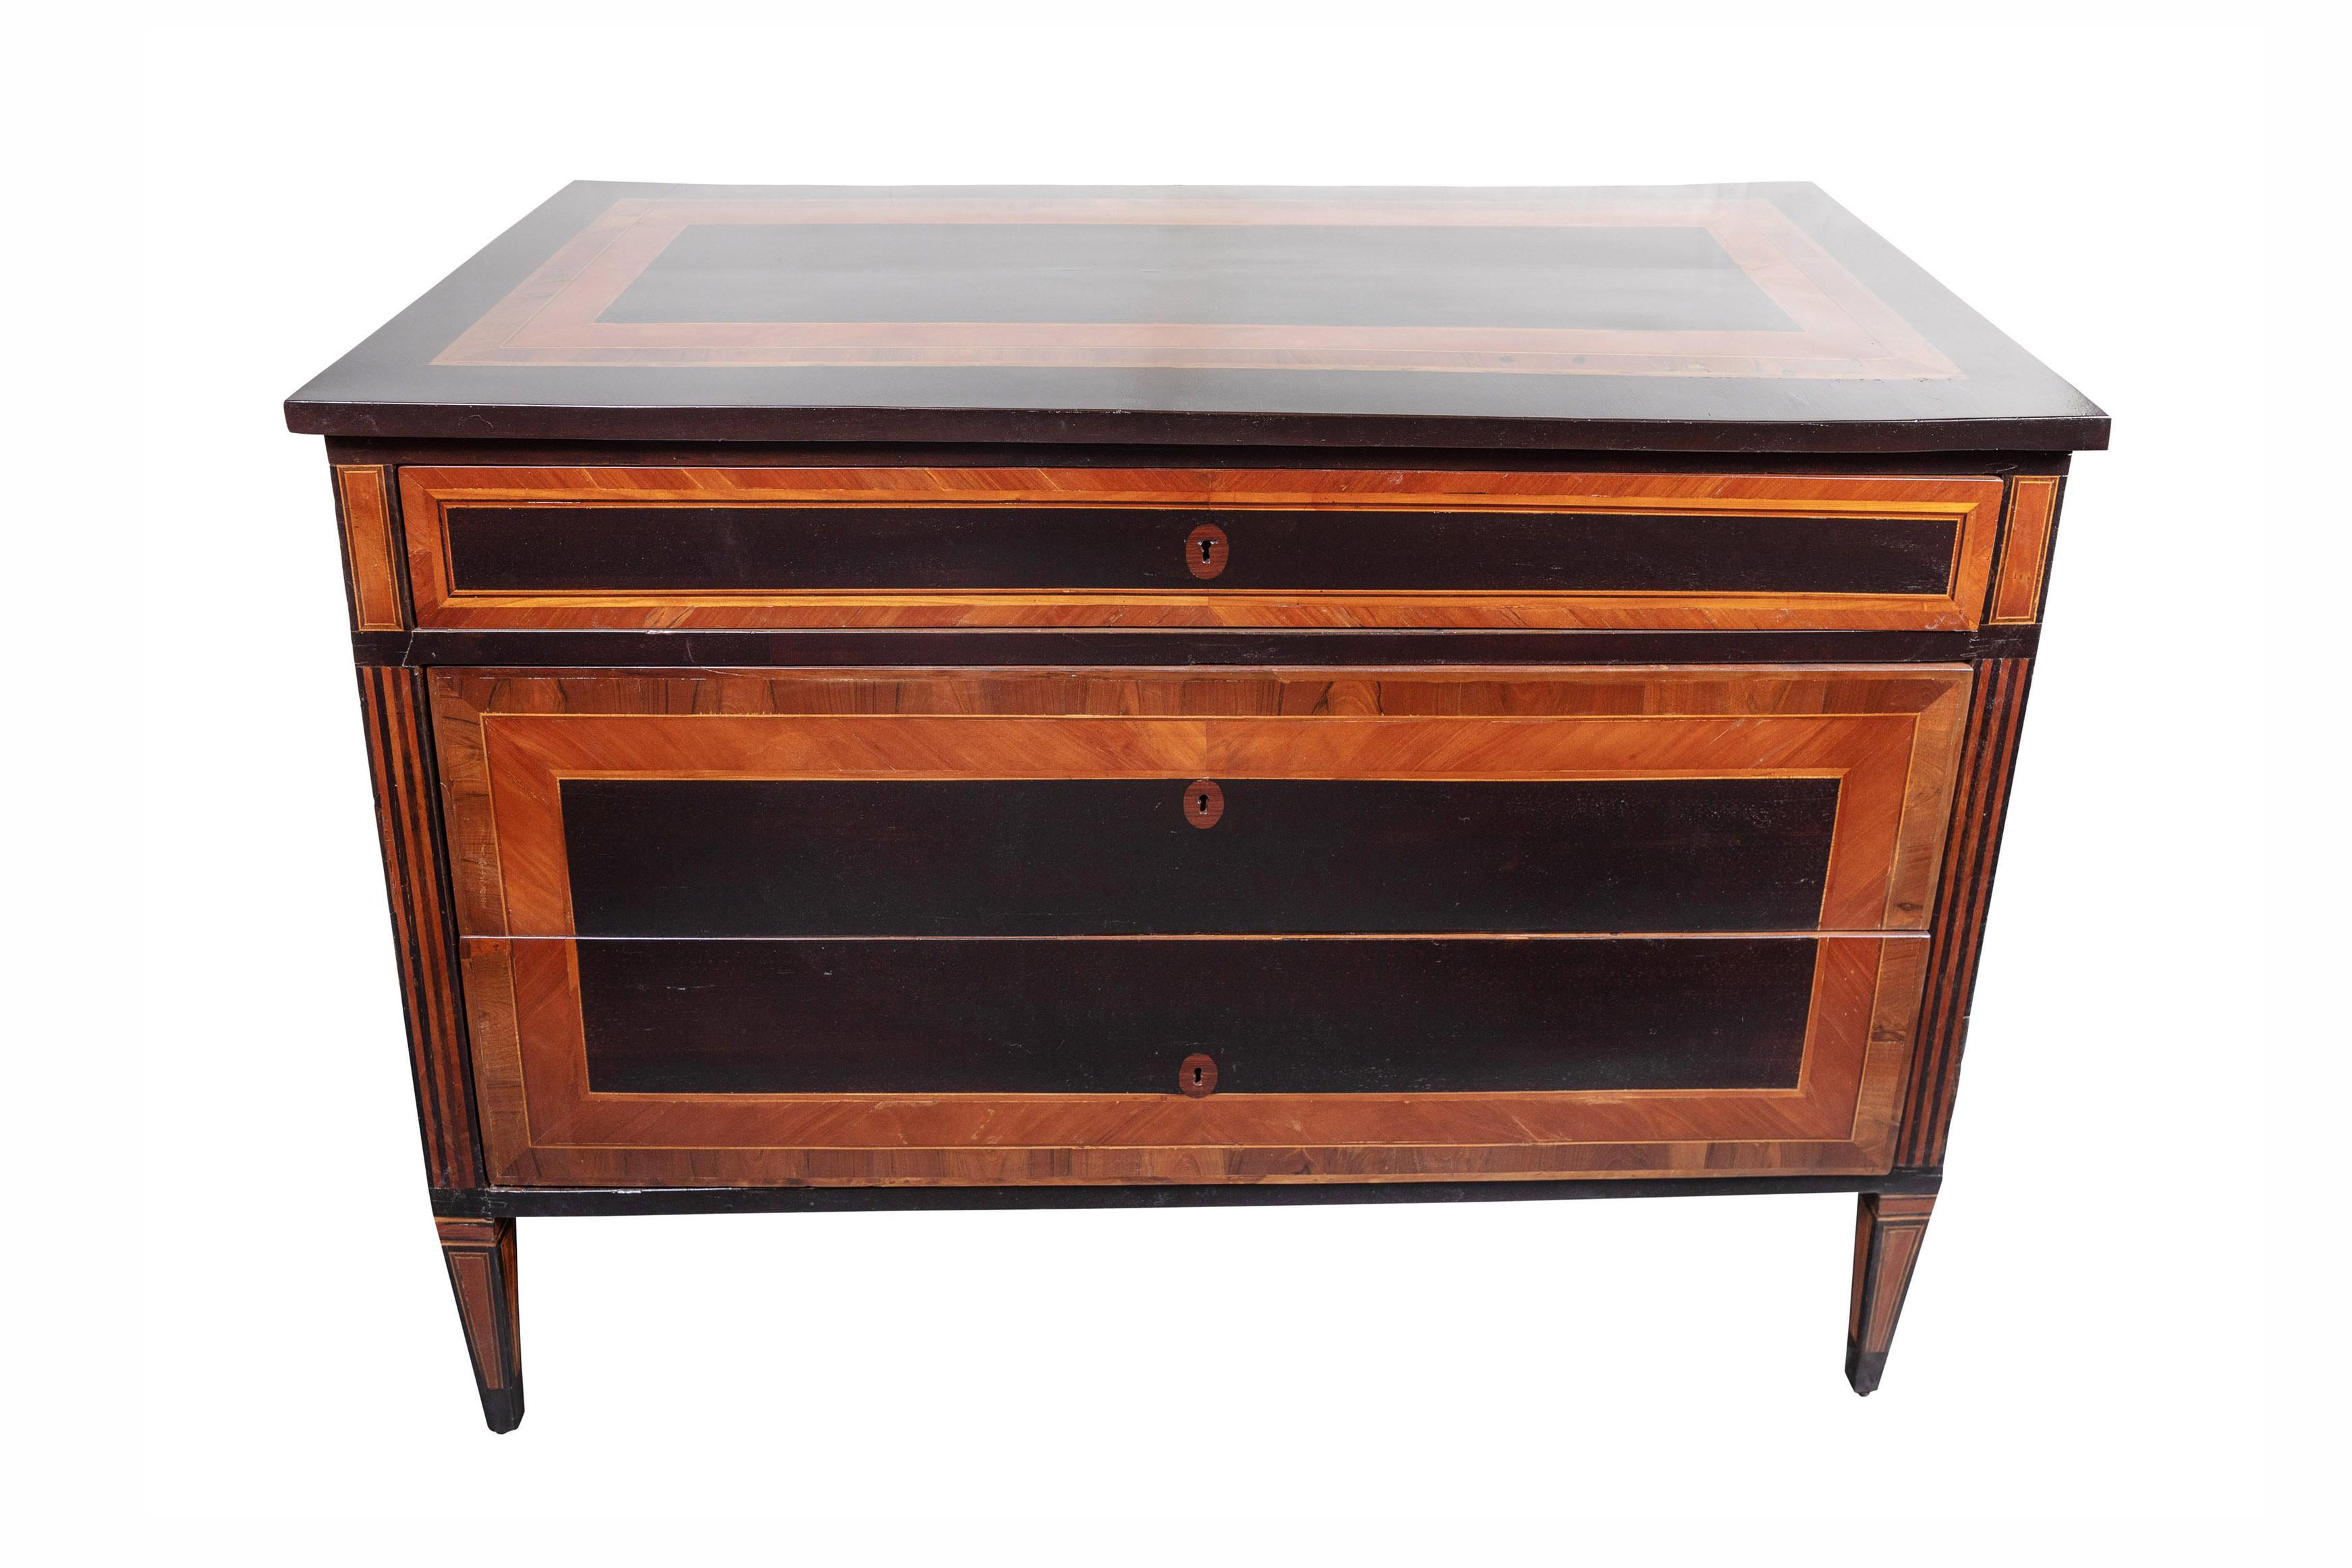 Two, large, 19th century, Tuscan, three-drawer commodes with beautiful, walnut and ebonized wood veneer and inlay throughout. Faux paneling on all three sides. Each on tapered legs.